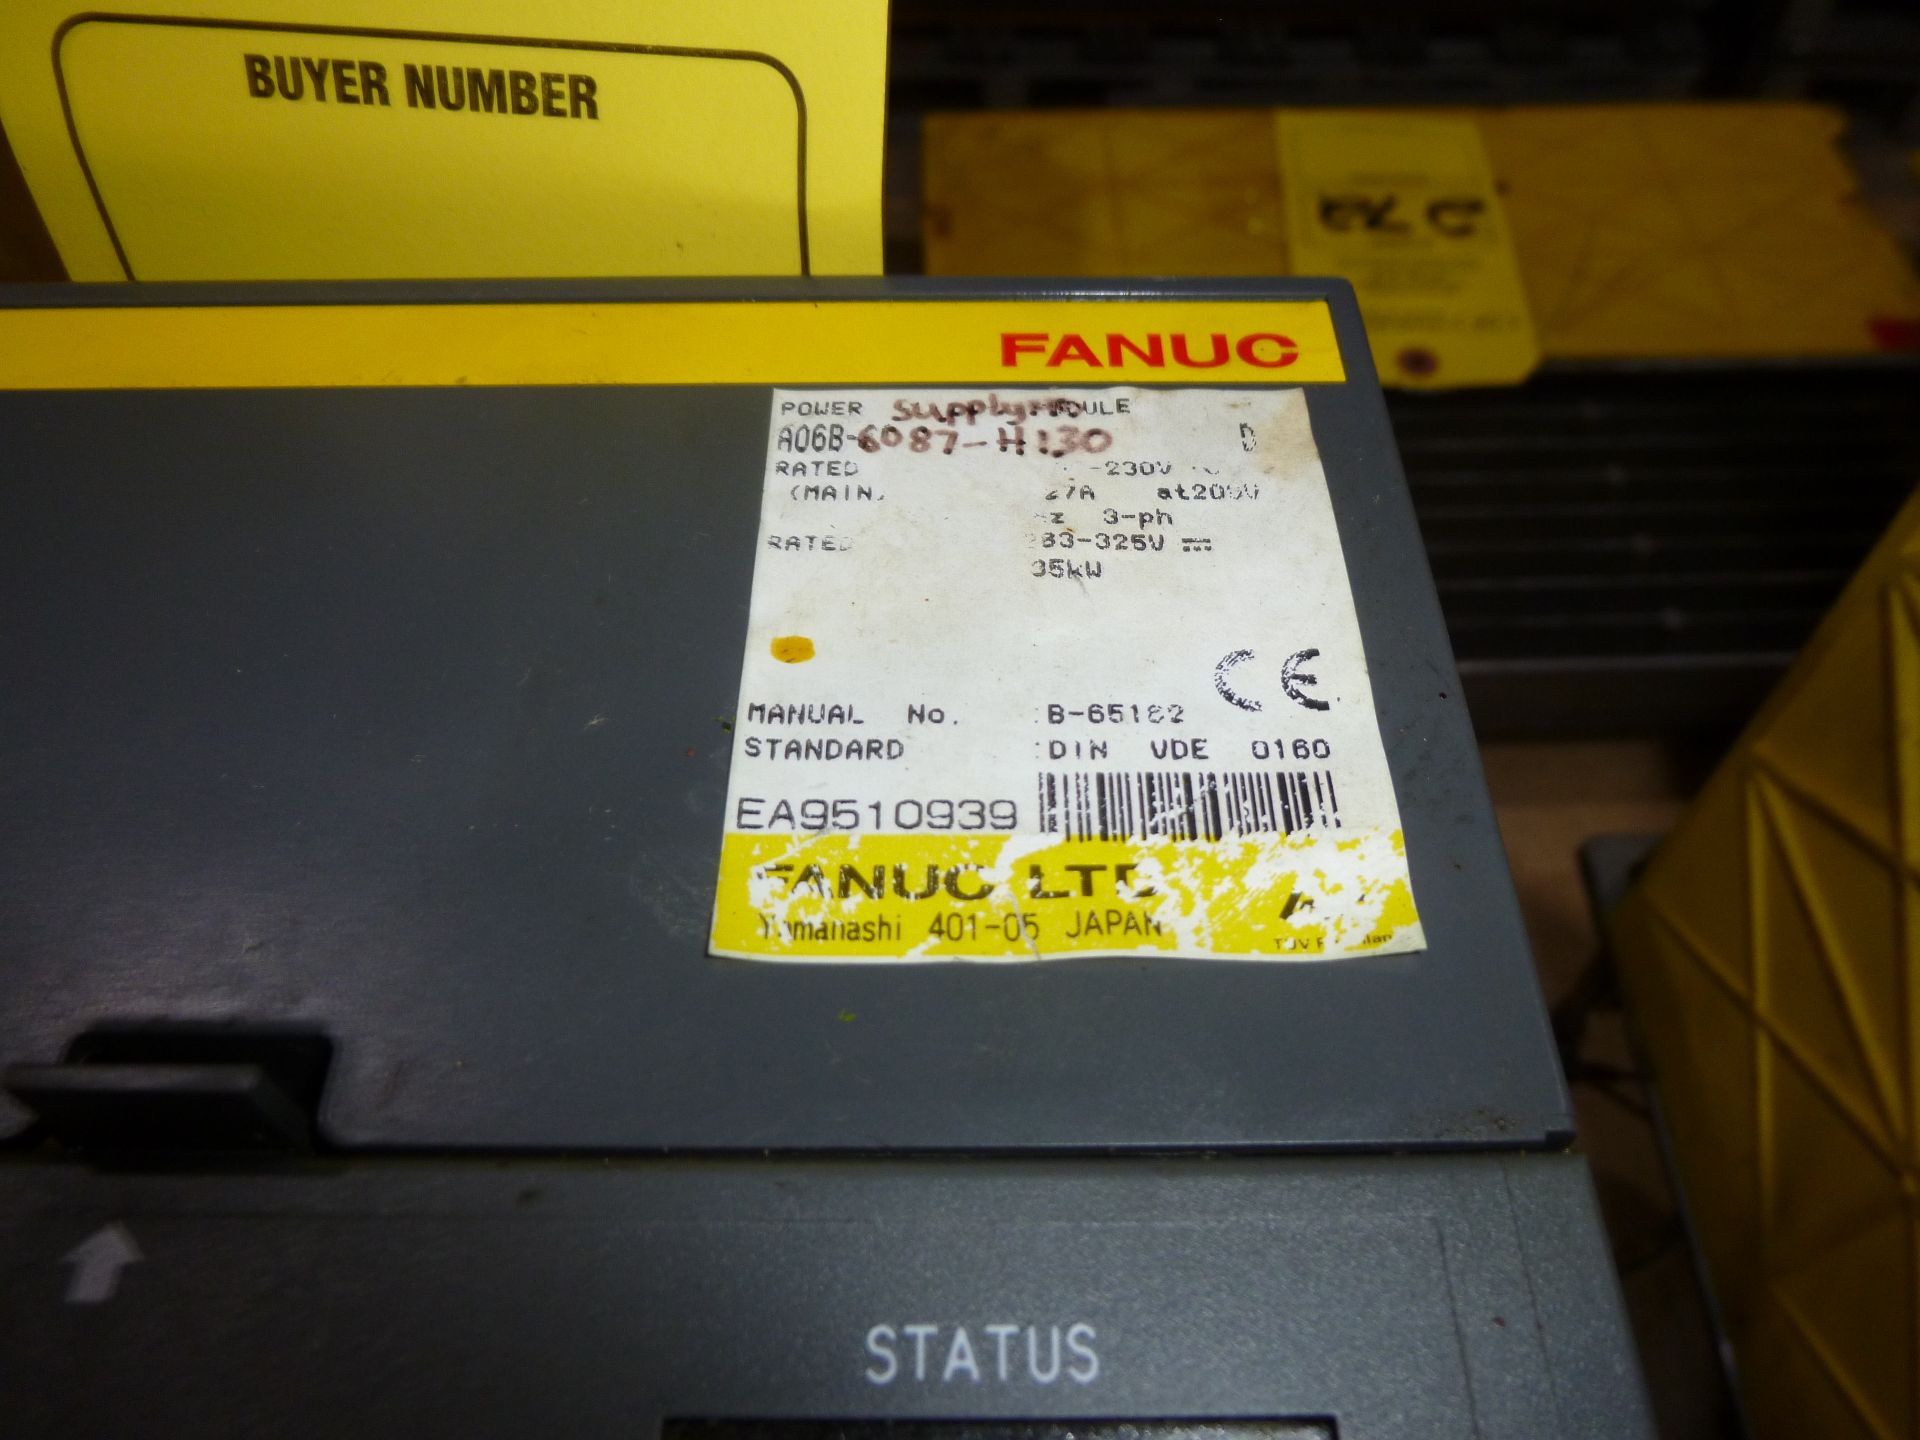 Fanuc power supply module model A06B-6087-H130, as always with Brolyn LLC auctions, all lots can - Image 2 of 2